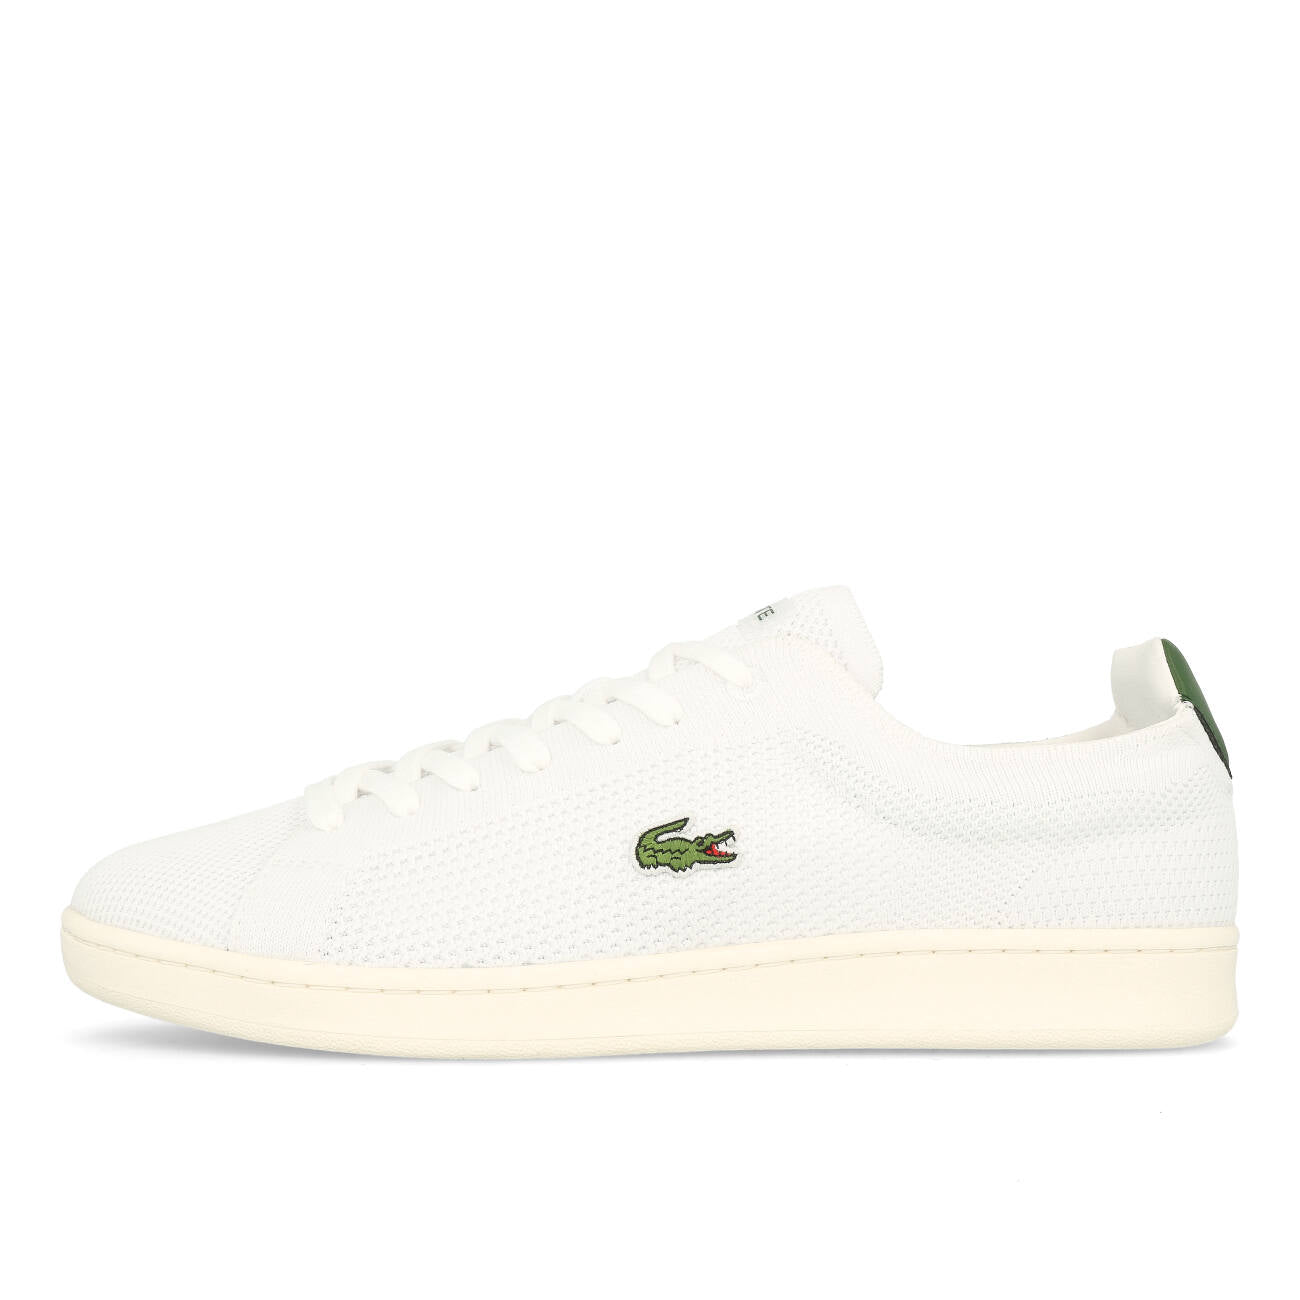 Lacoste Carnaby Piquee 123 1 SMA Herren White Green